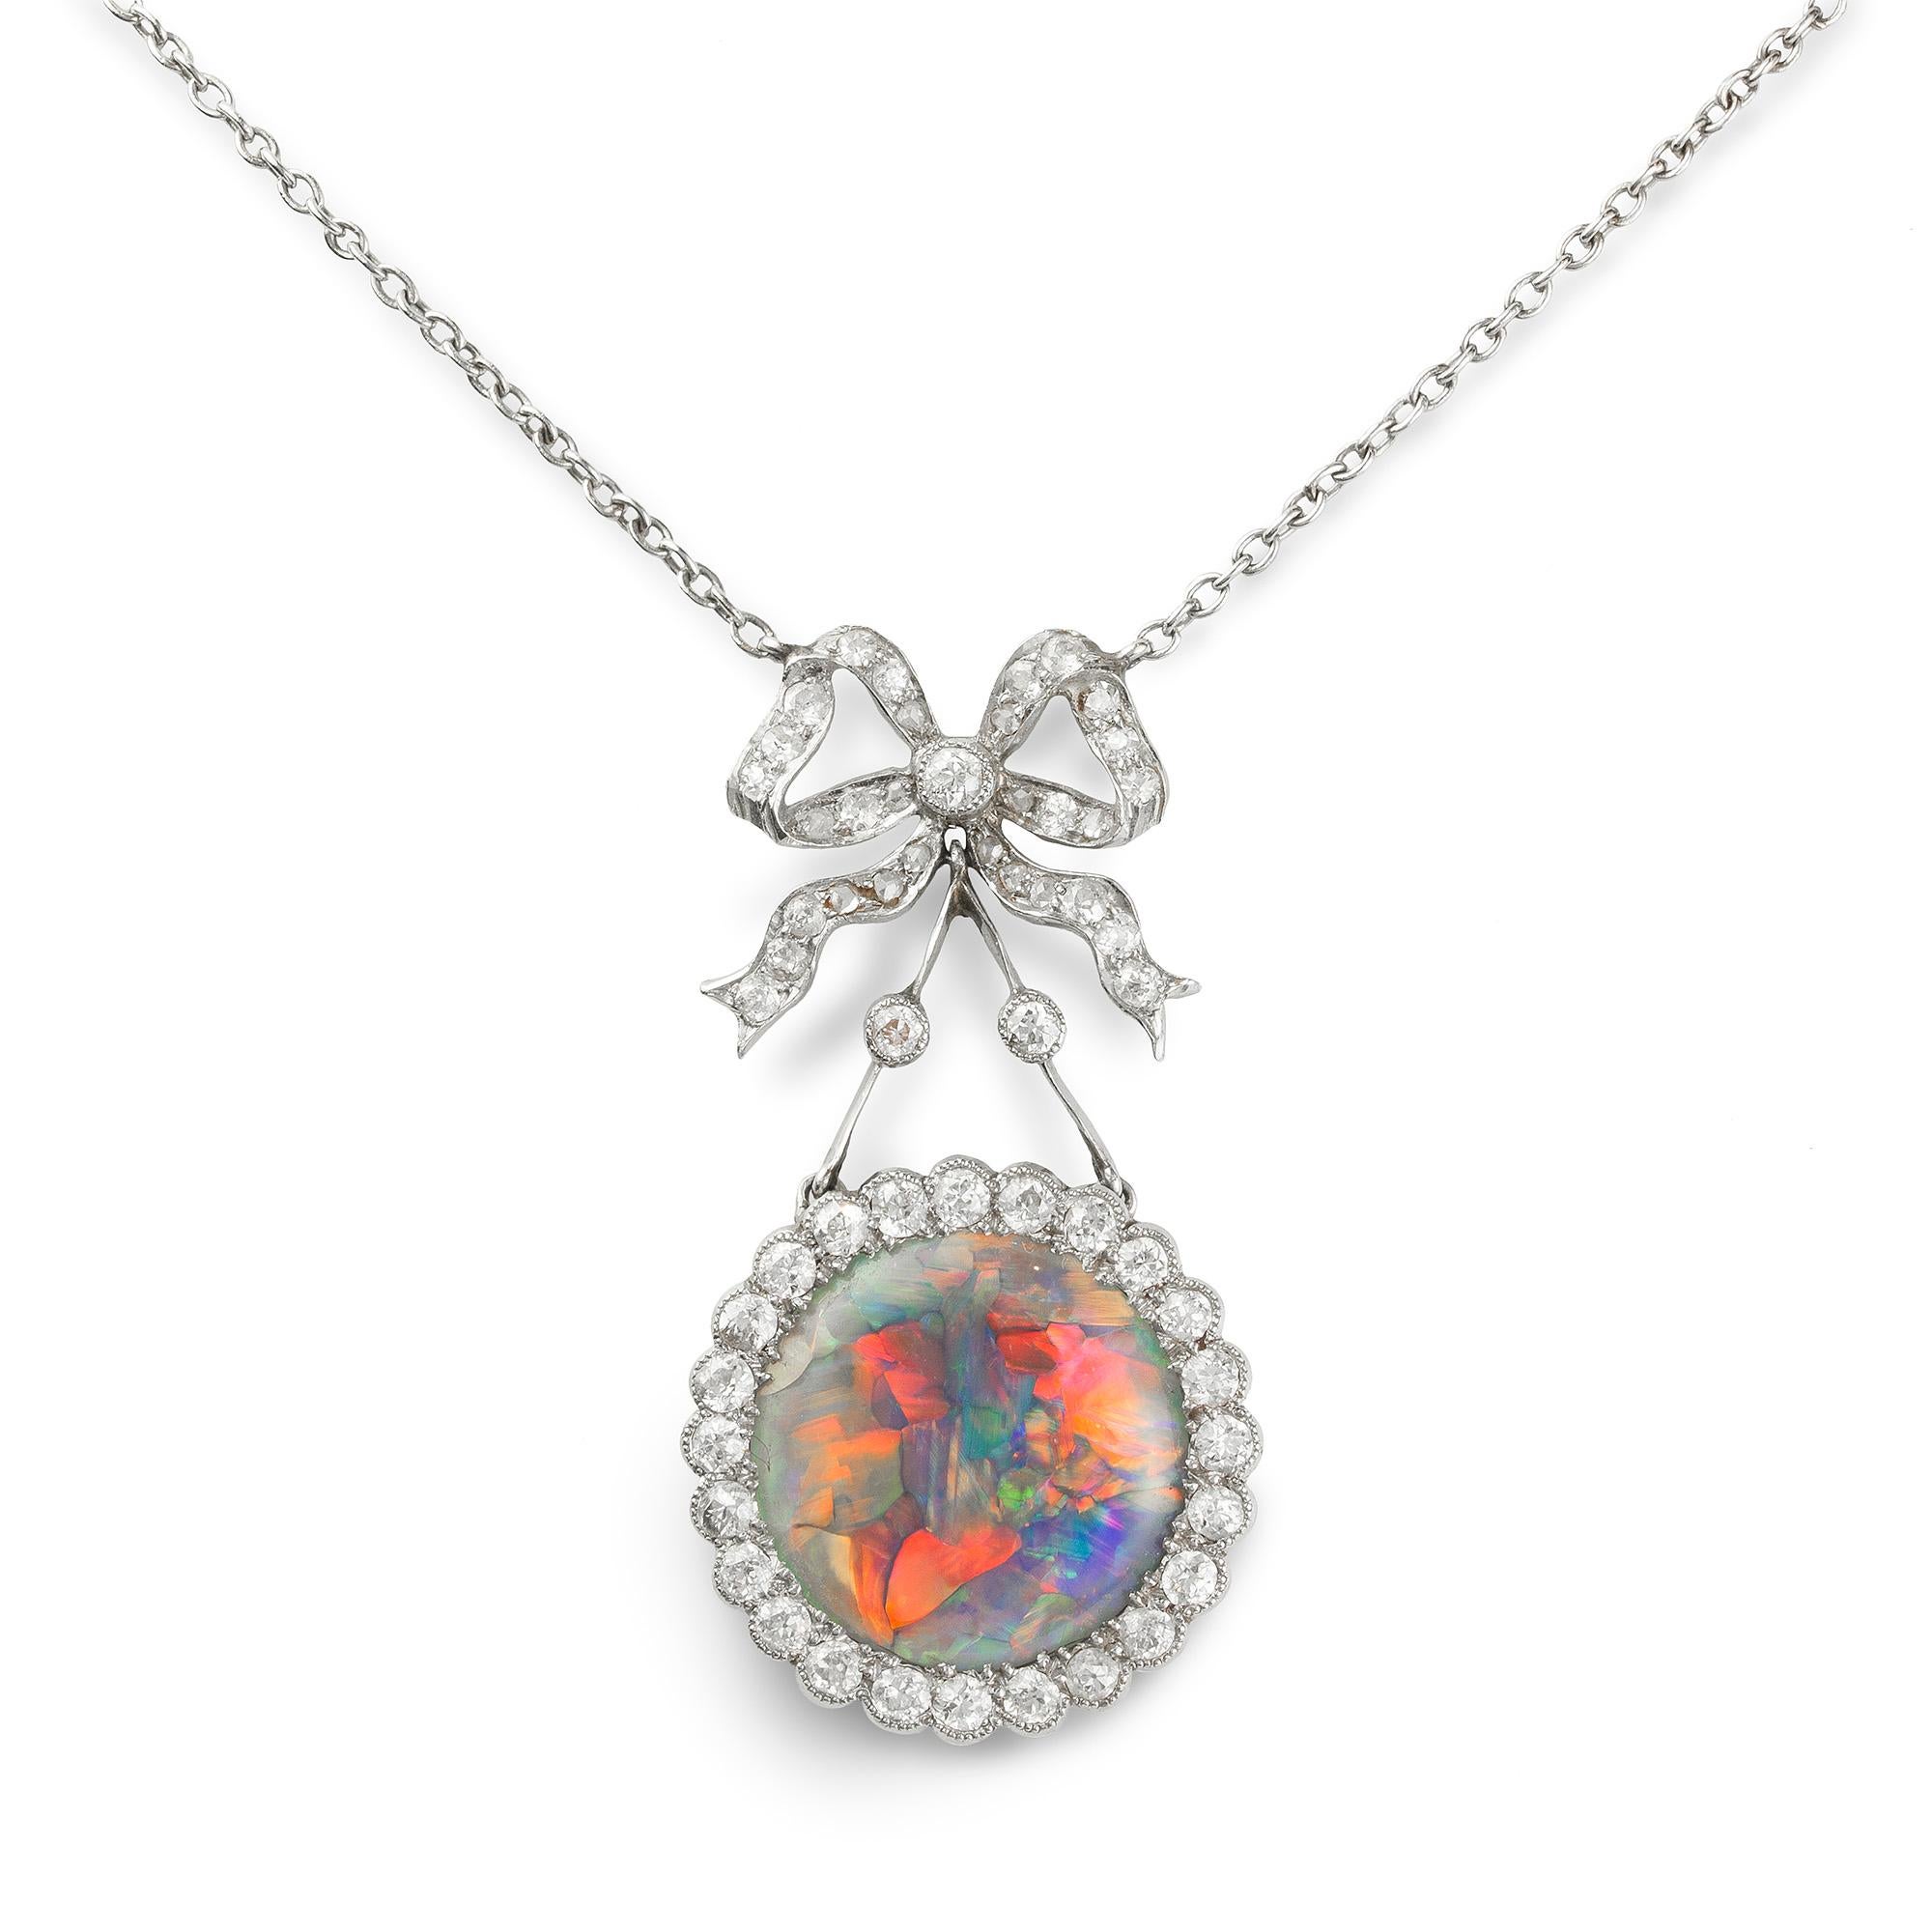 An Edwardian opal and diamond pendant, the central circular opal is surrounded by old brilliant-cut diamonds in a platinum millegrain setting suspended from a diamond-set bow attached to a white gold chain, circa 1910, the pendant measuring